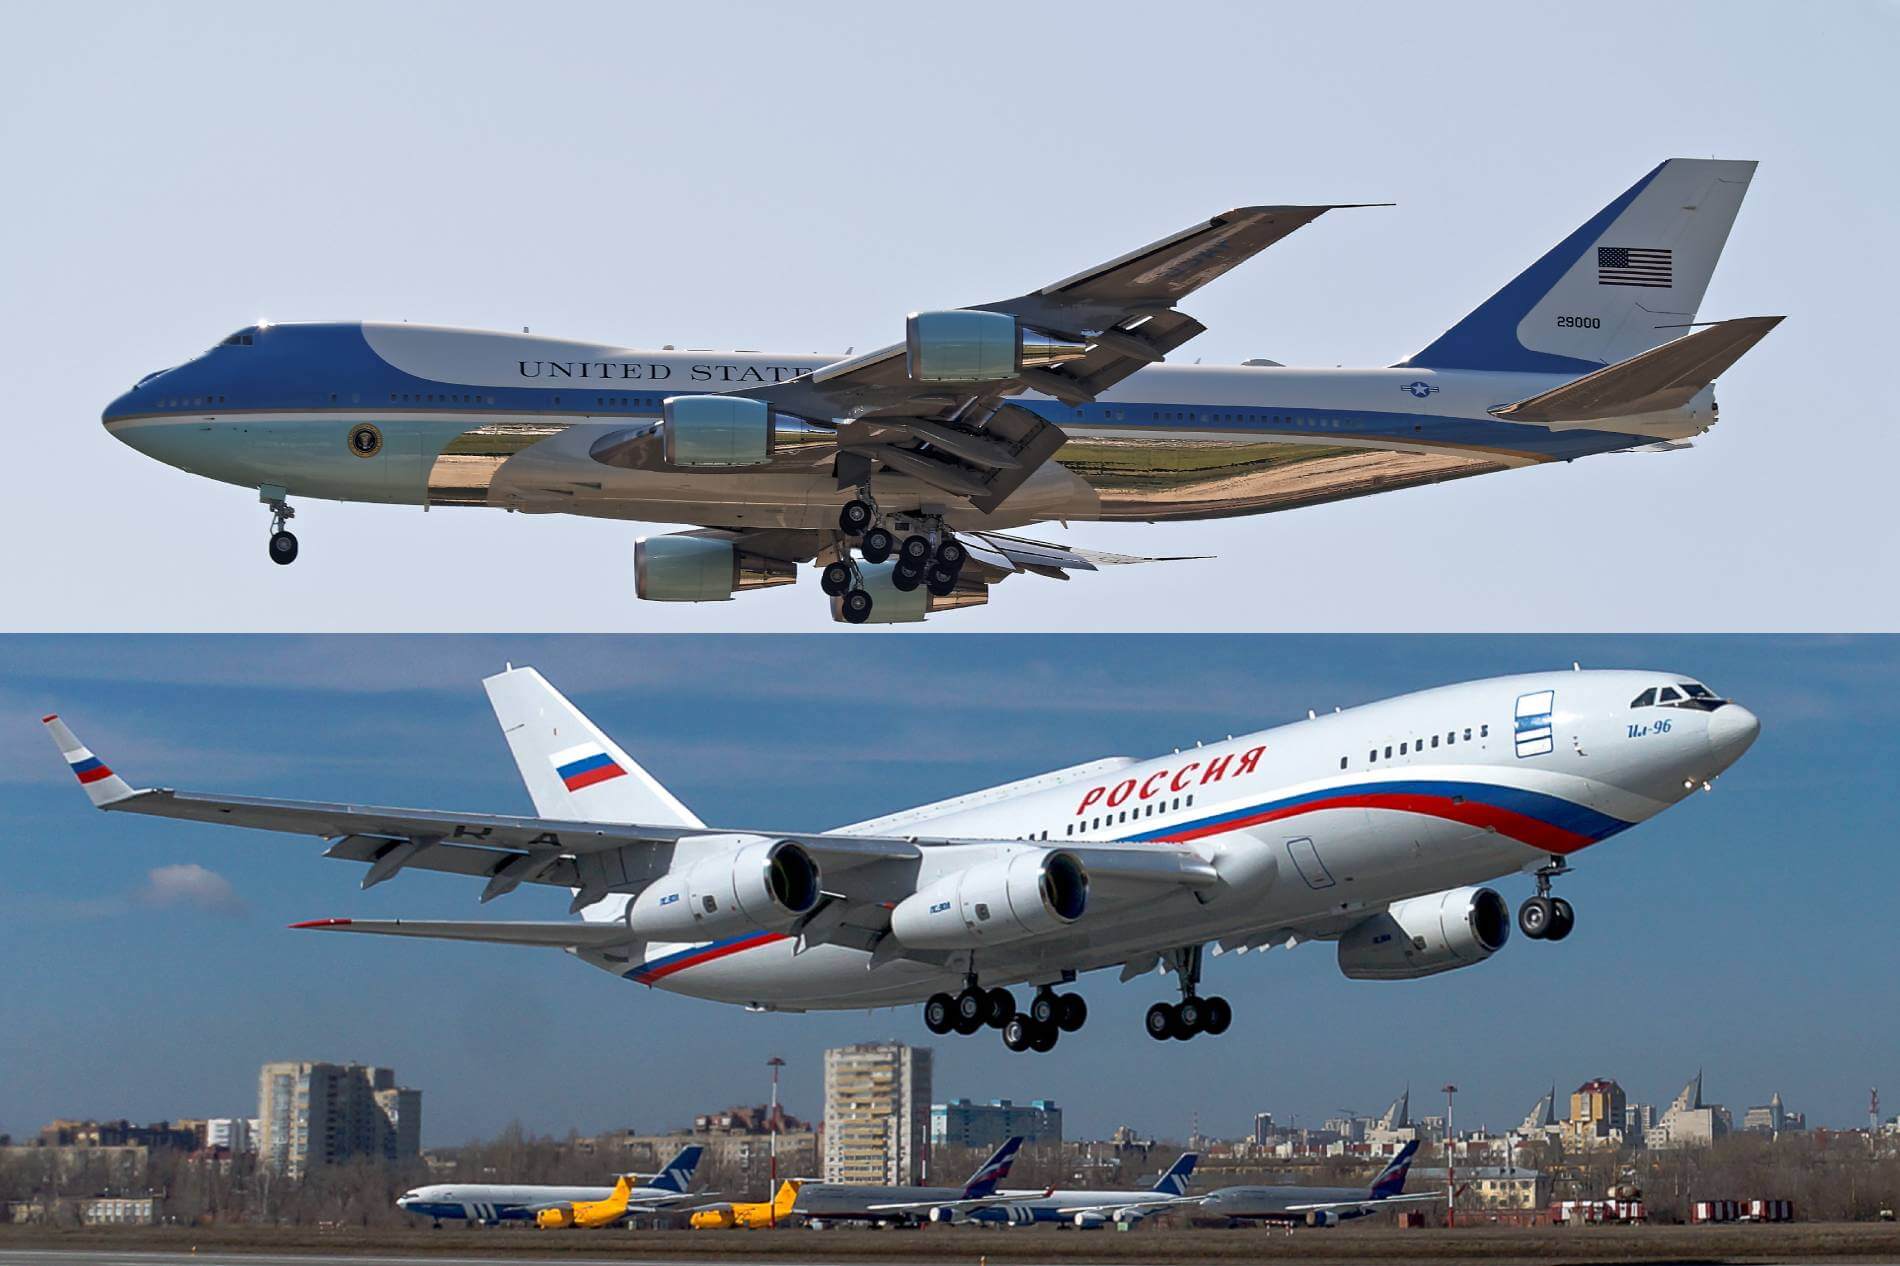 Air Force One vs Putin Force One: which is more impressive? - AeroTime